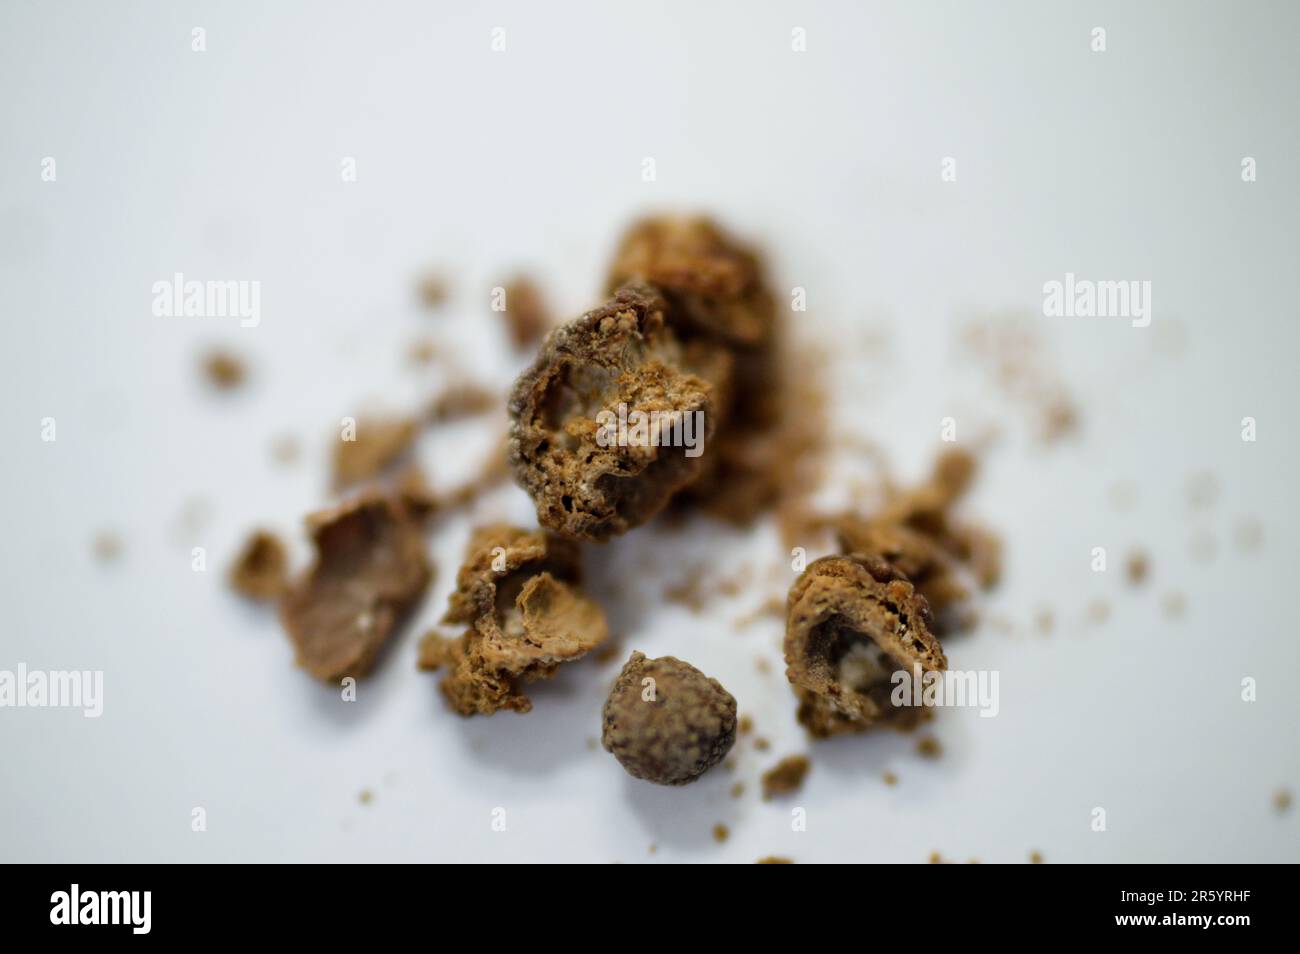 Nephrolithiasis, irregular brown kidney stones (renal calculus or nephrolith), the stones are different in size after operative ureteroscopy and Laser Stock Photo